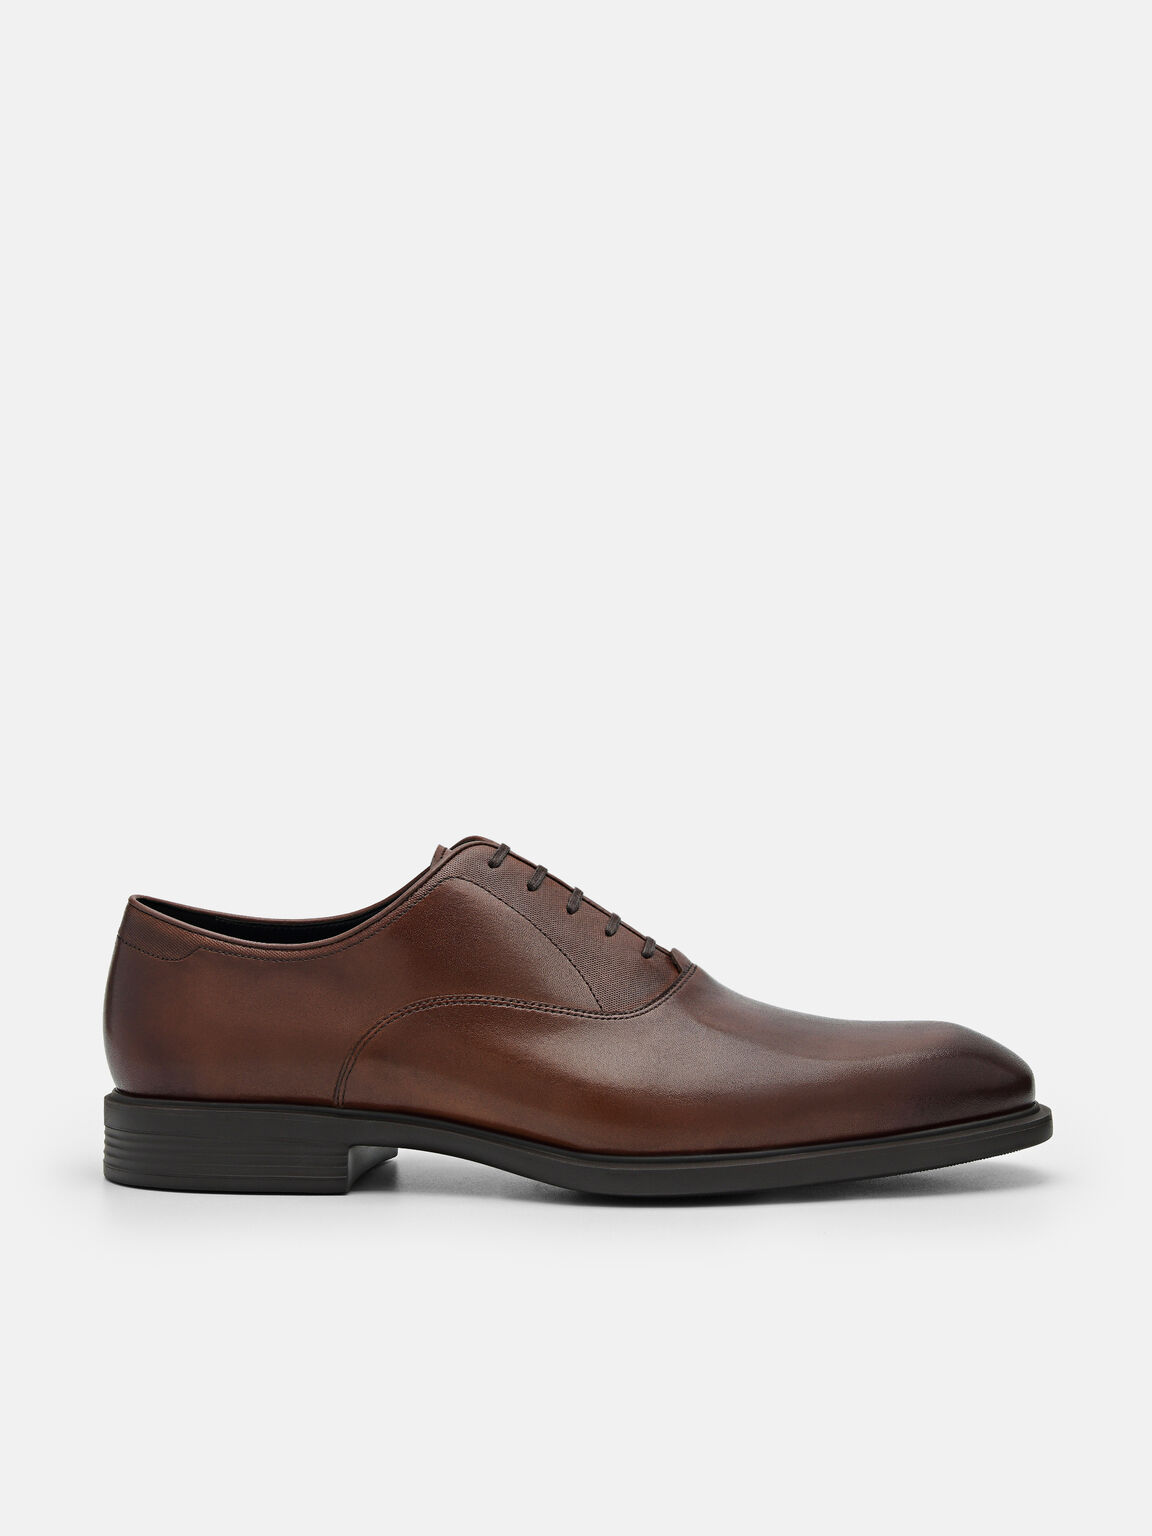 Leather Oxford Shoes, Brown